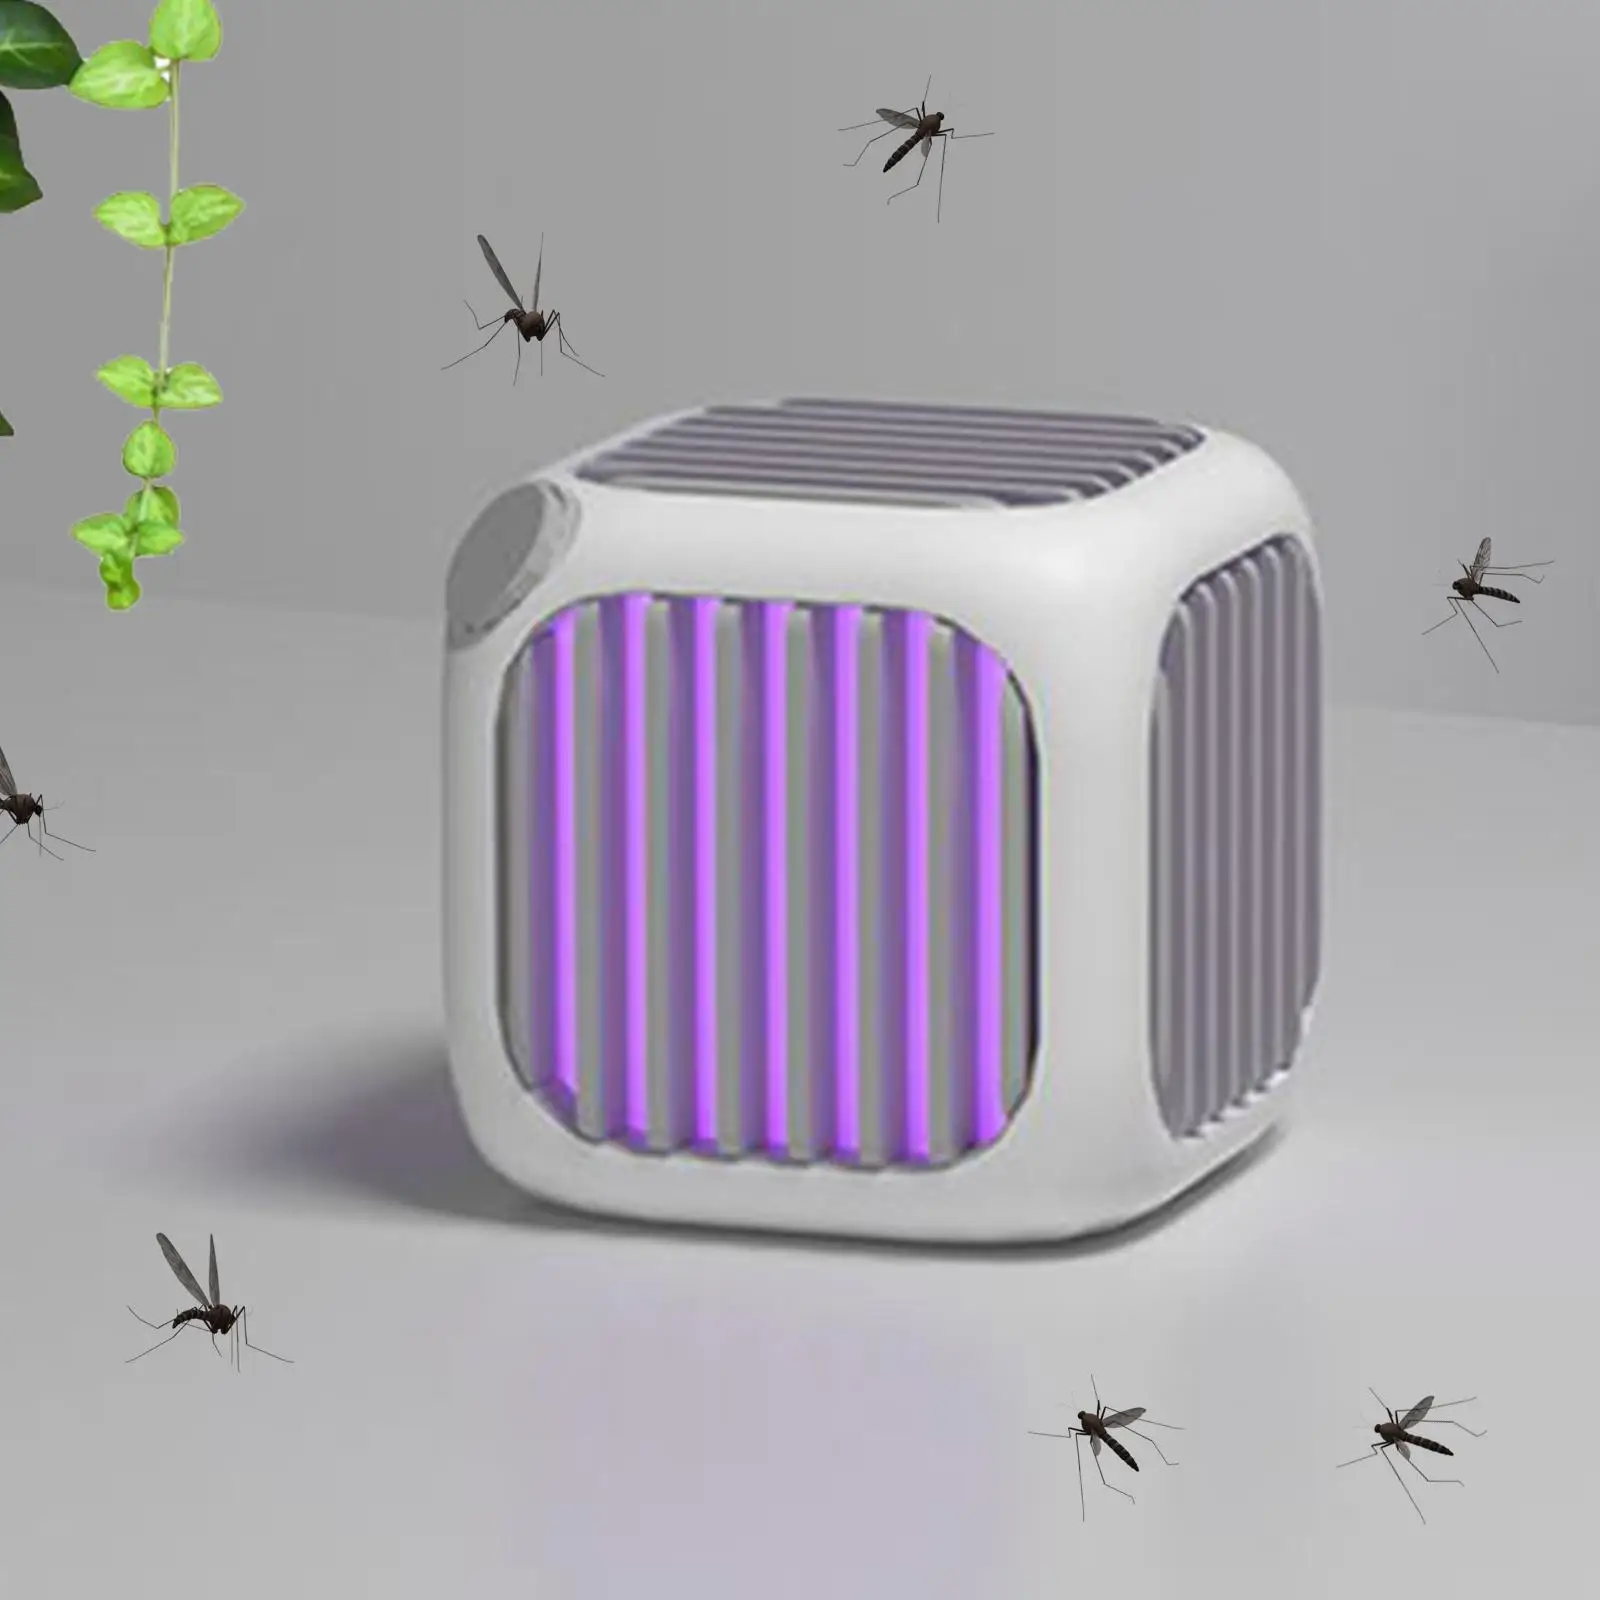 Fly Silent USB Gnat Flies Control Electric Fly Catcher Lamp Fly Lamp for Tent Patio Outdoor Home Garden